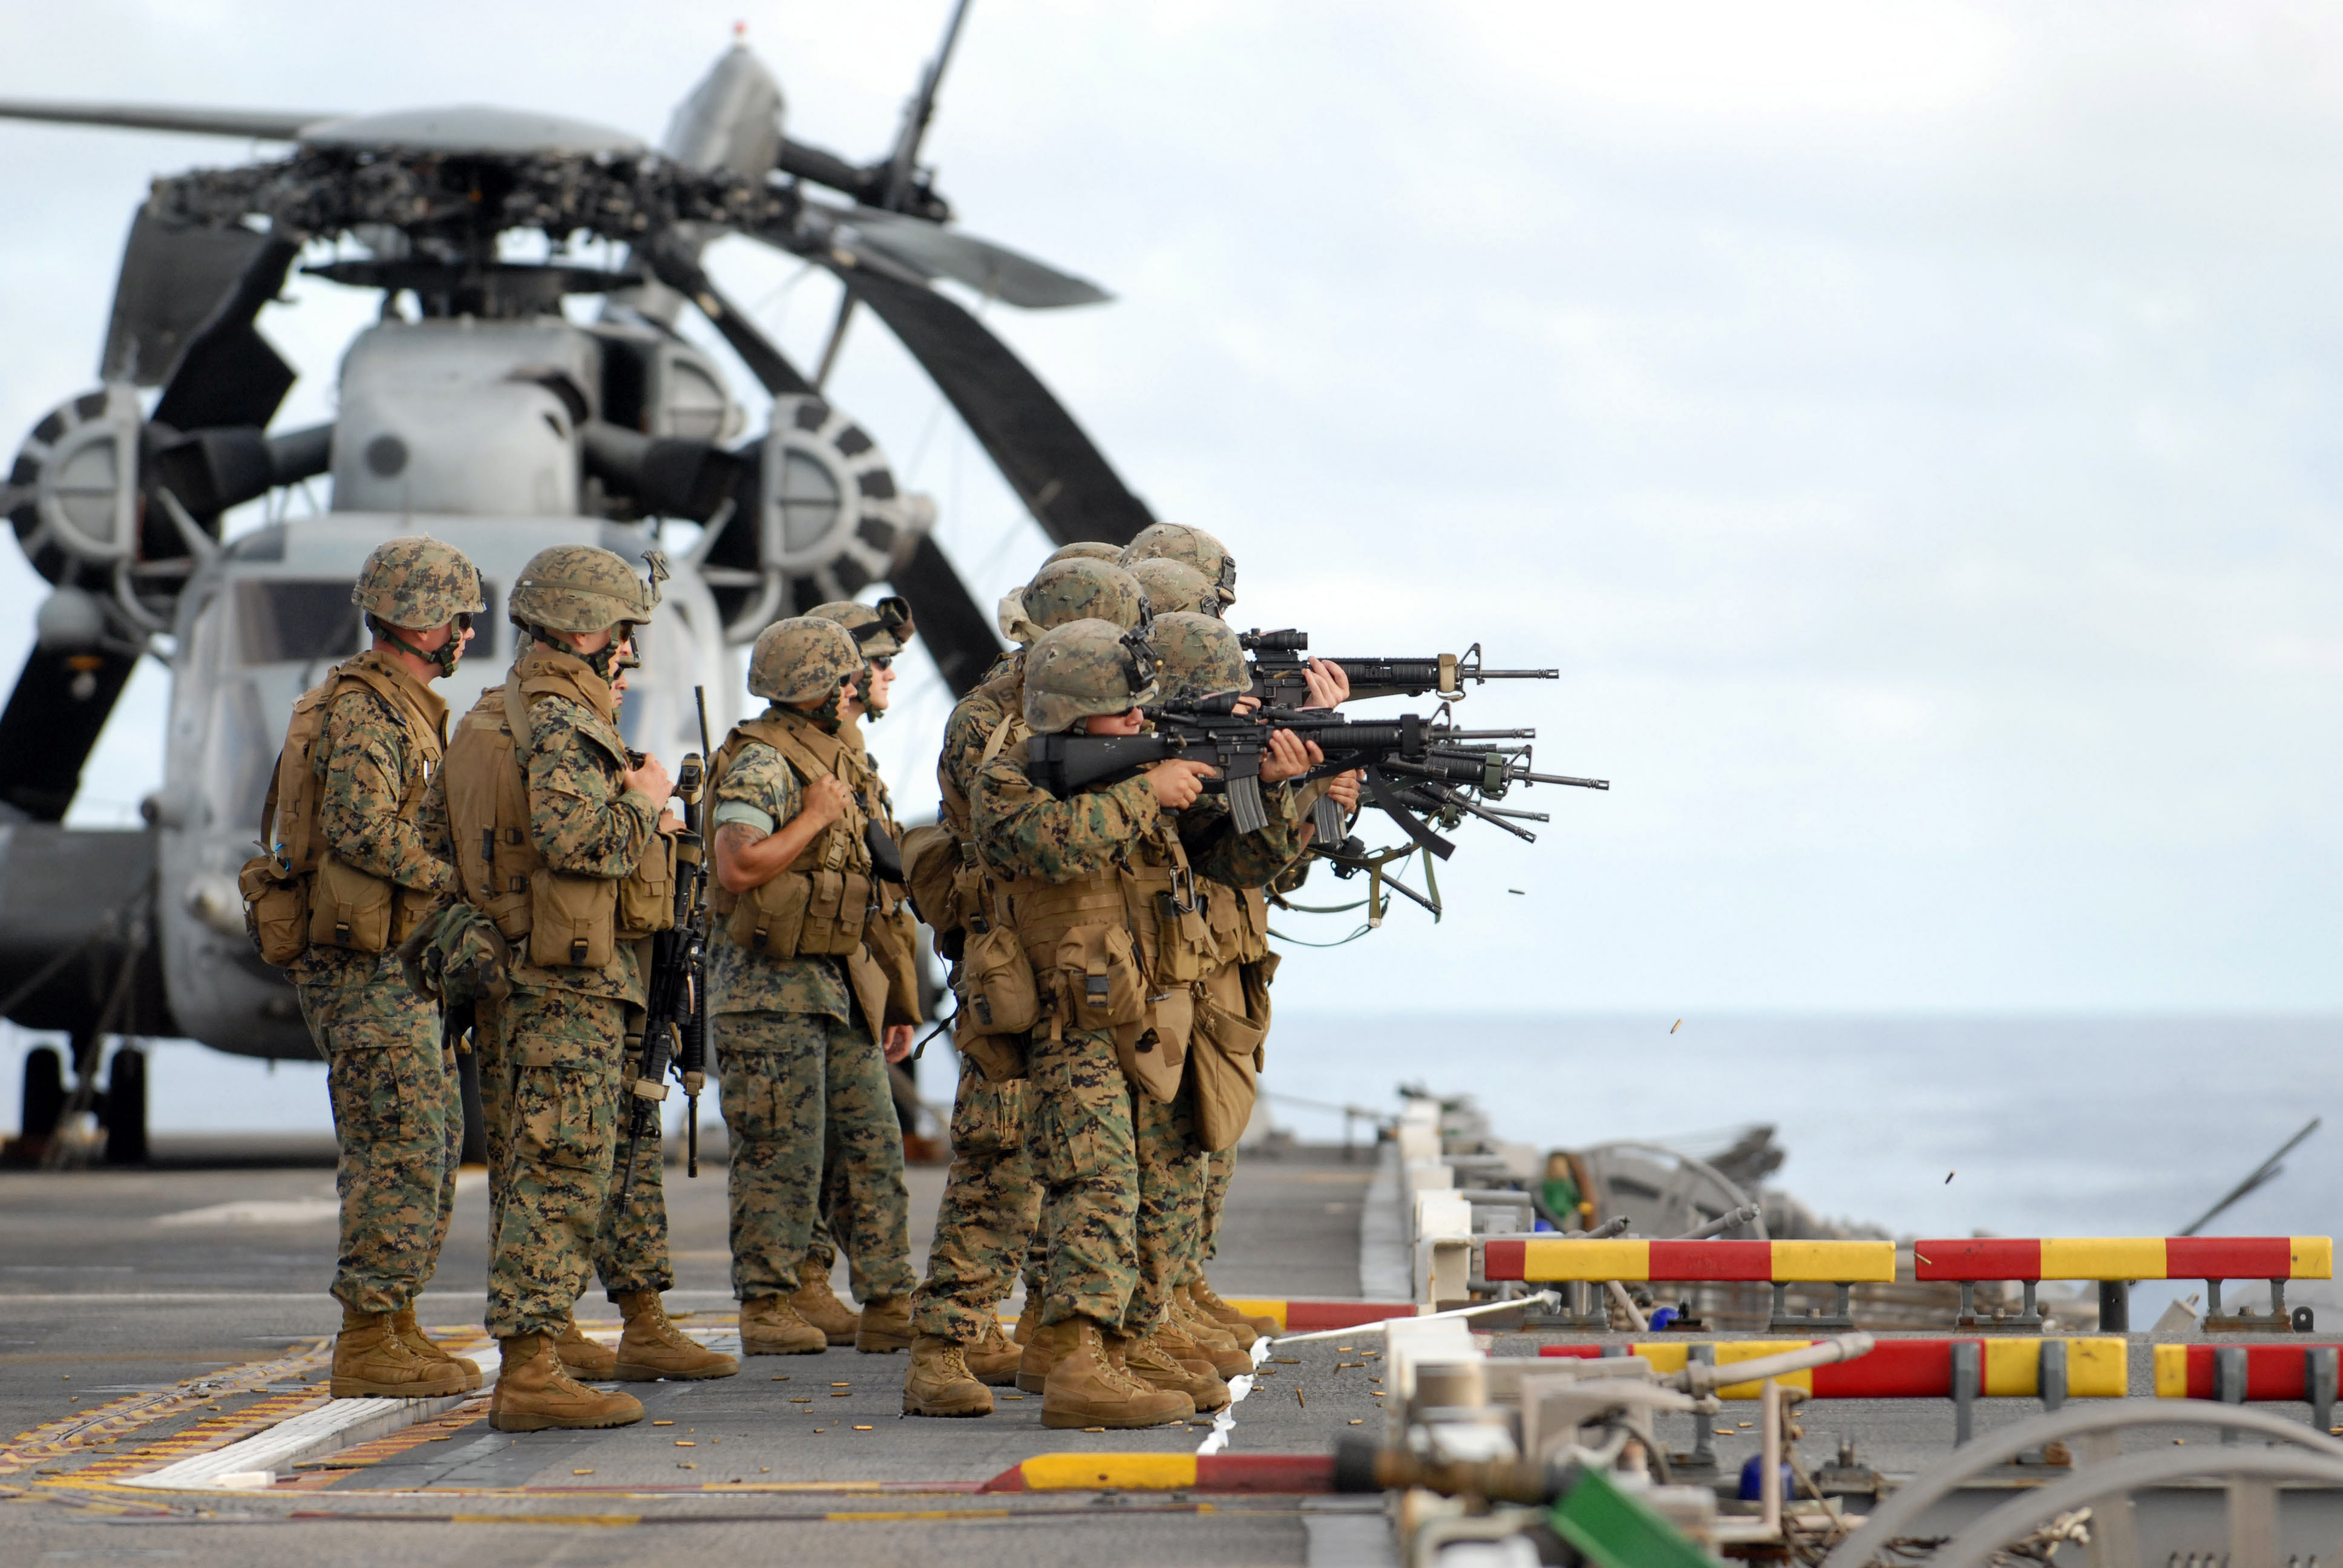 US_Navy_070530-N-4207M-140_Marines_attached_to_the_31st_Marine_Expeditionary_Unit_conduct_marksmanship_training_over_the_portside_elevator_aboard_the_amphibious_assault_ship_USS_Essex_%28LHD_2%29.jpg